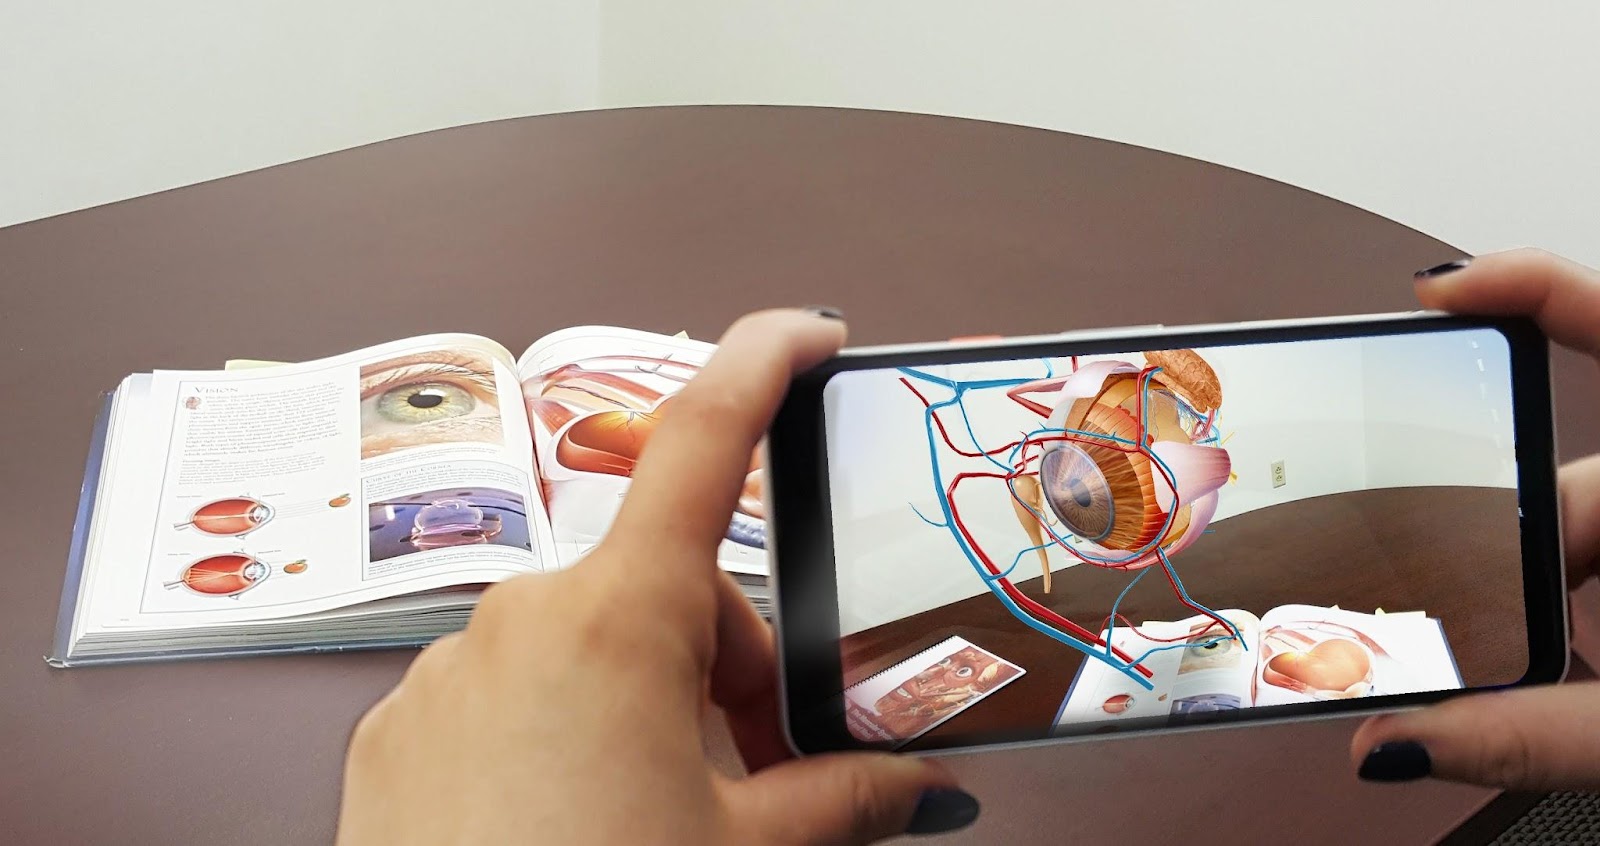 How Augmented Reality Can Change Education